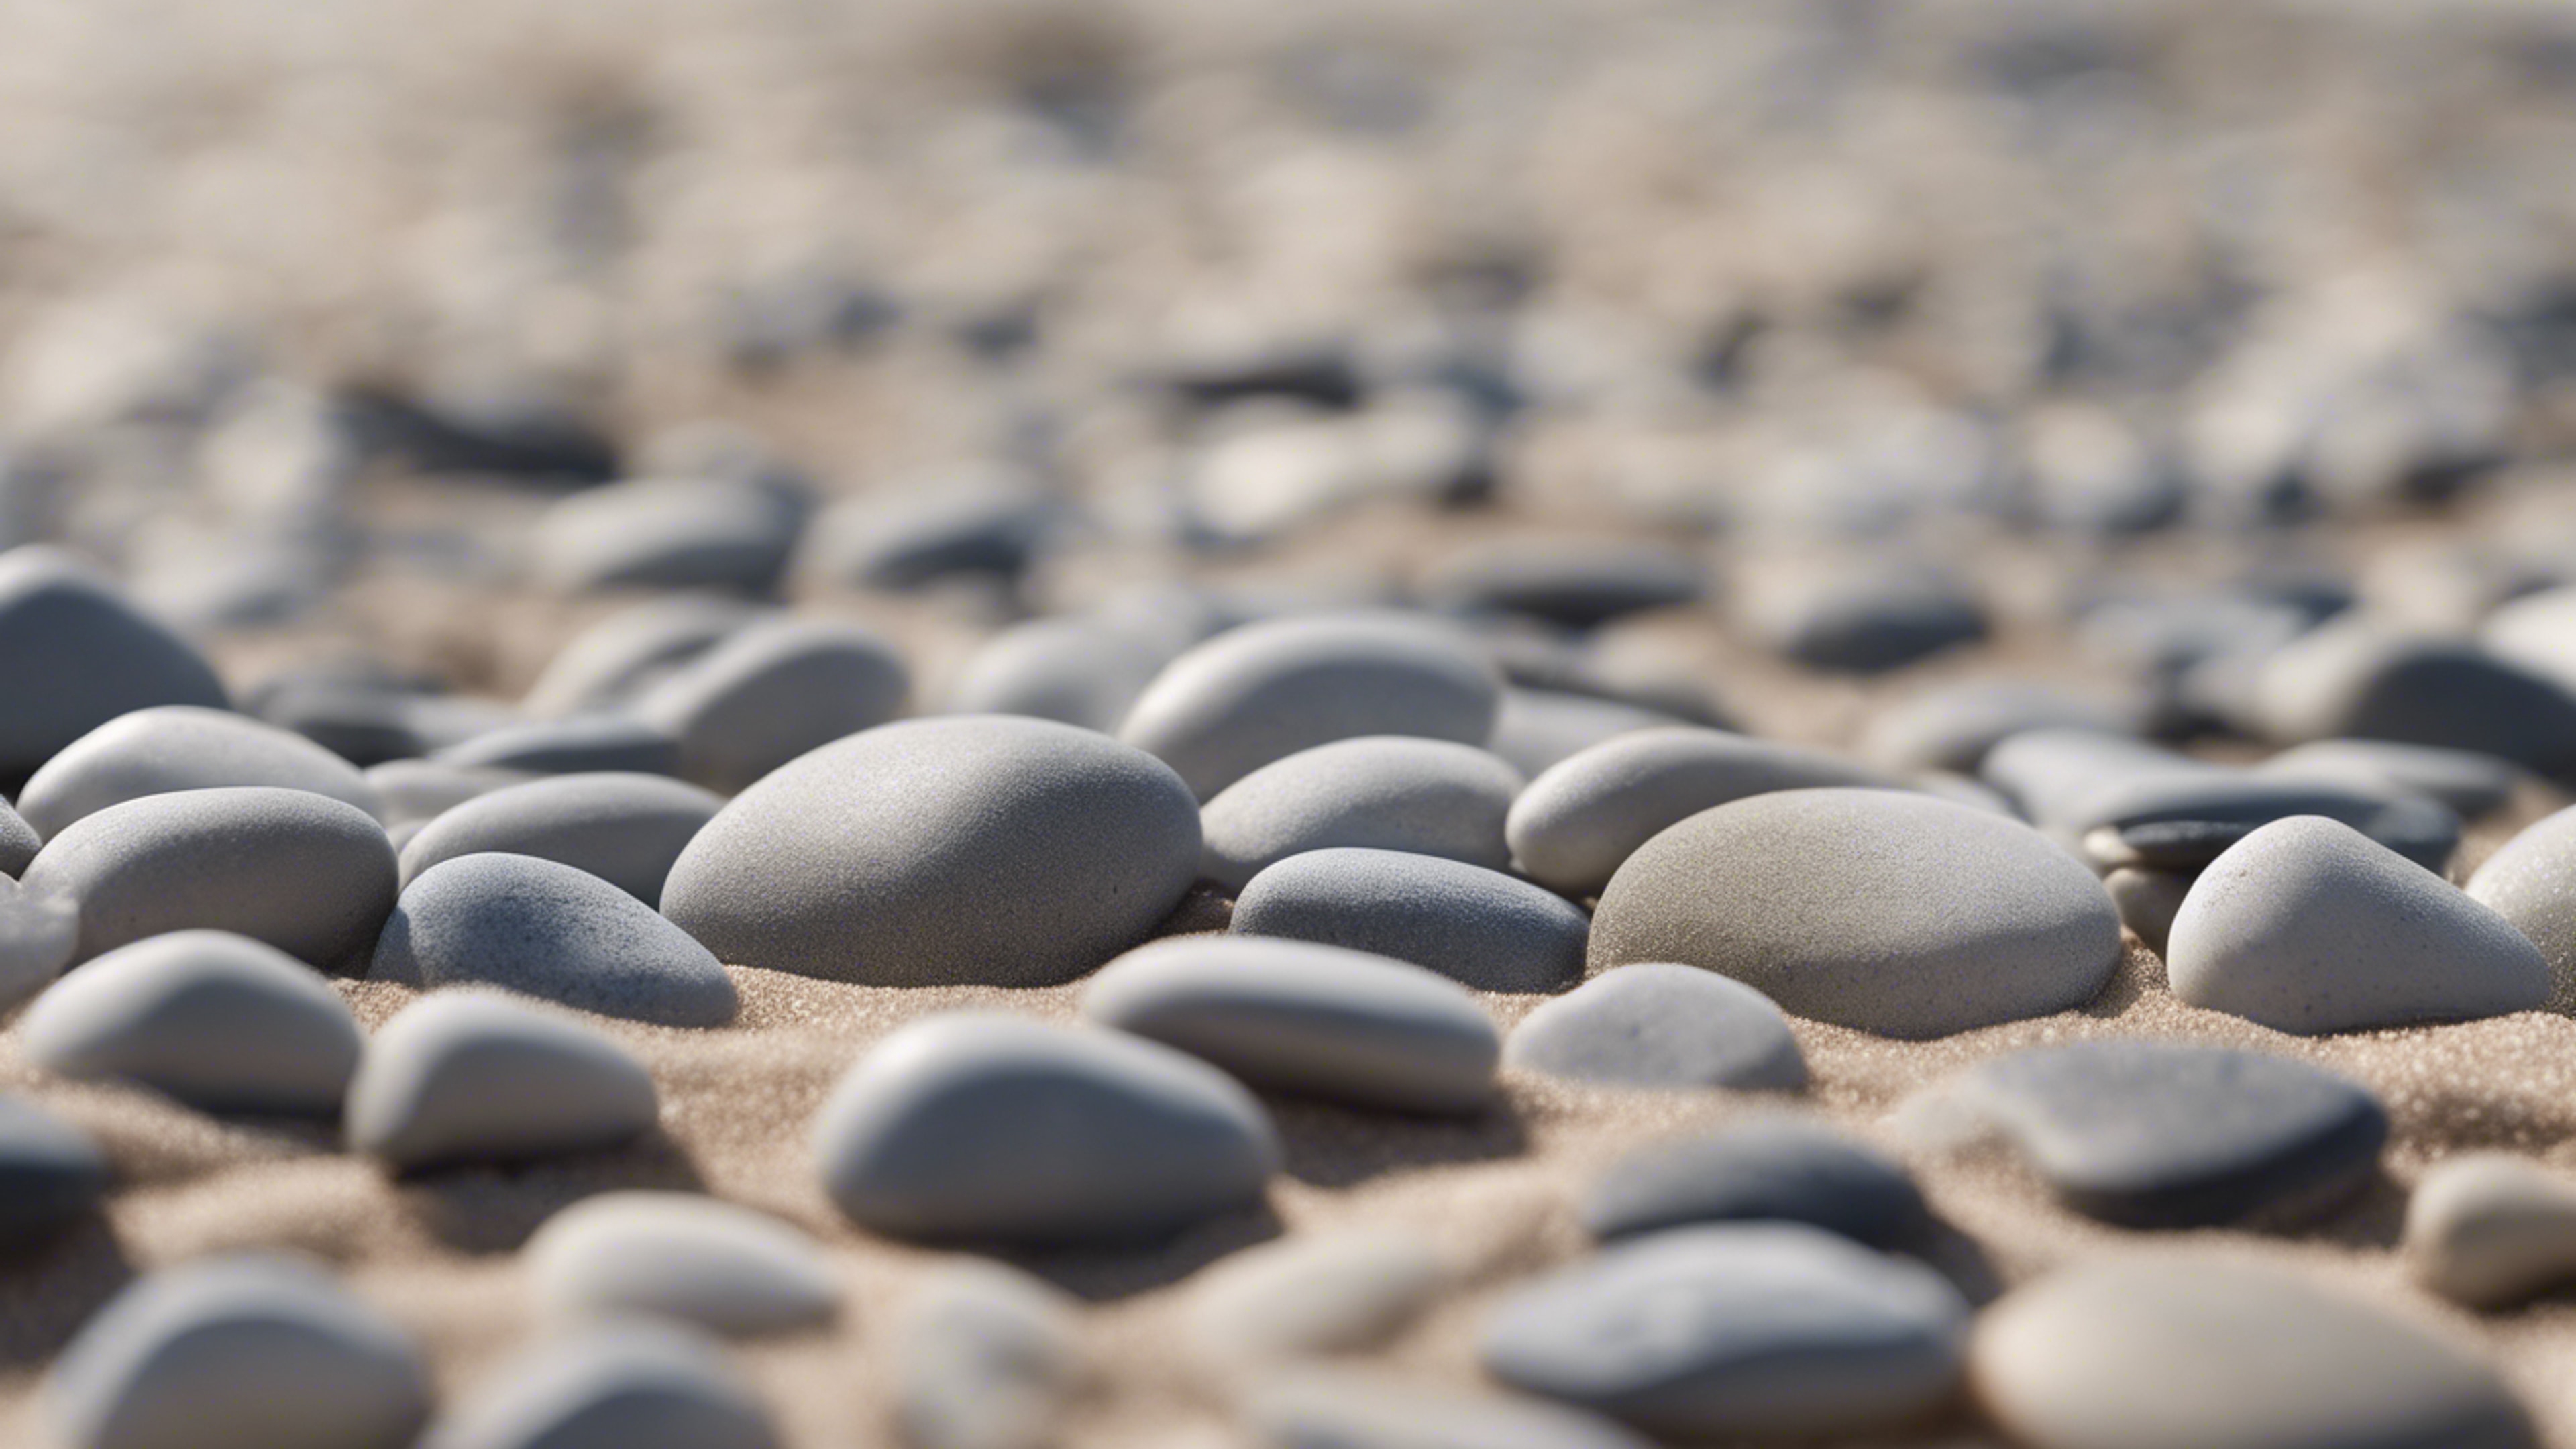 A collection of light gray pebbles arranged in an intricate pattern on a sandy beach. Обои[7440af21c01a4a2abeaf]